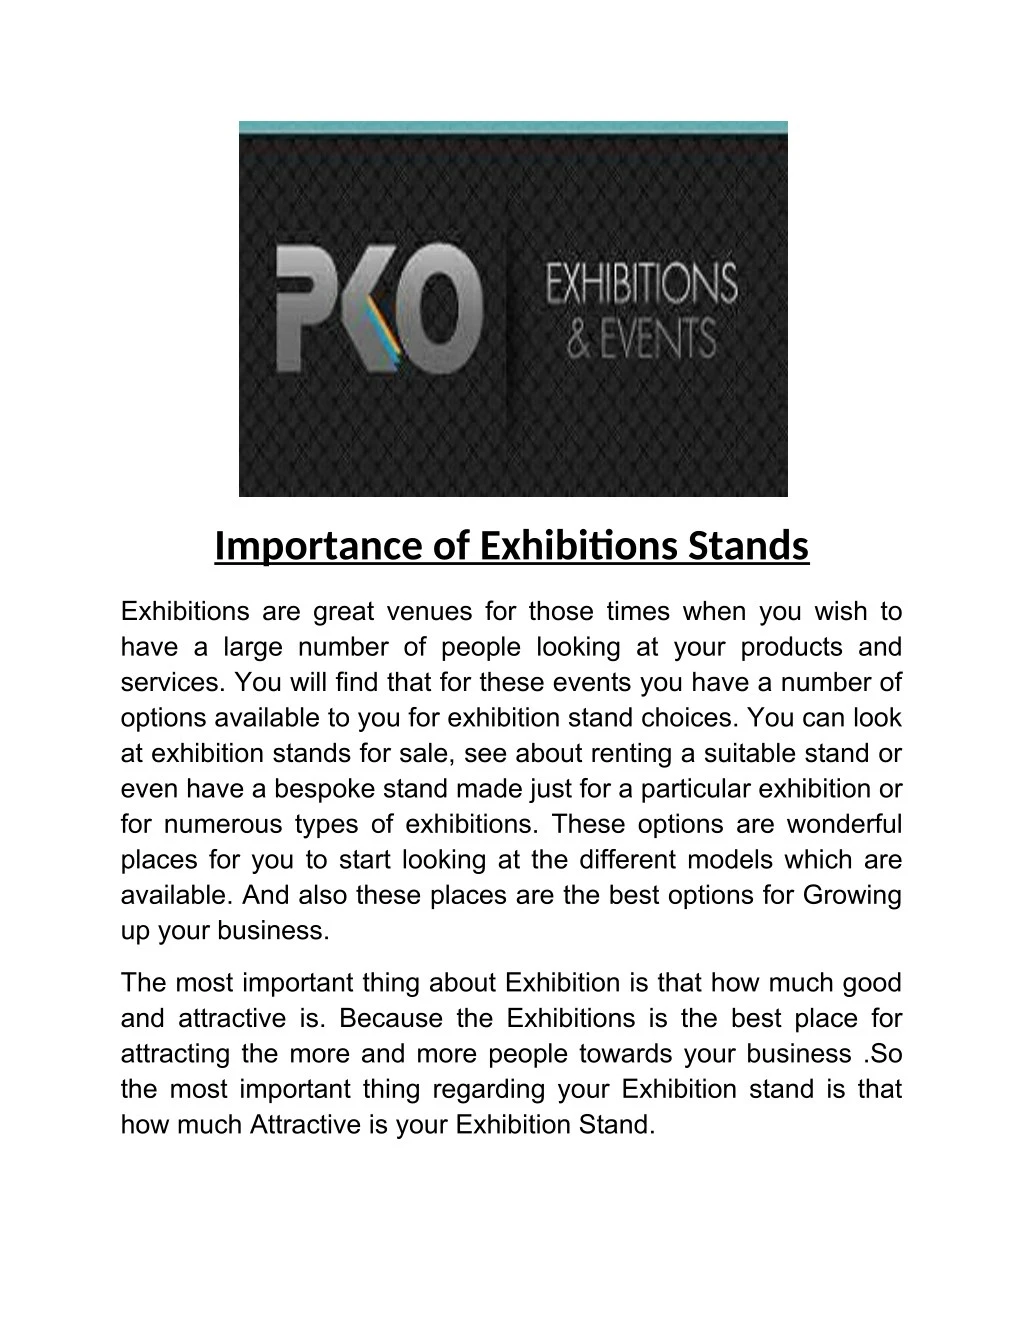 importance of exhibitons stands